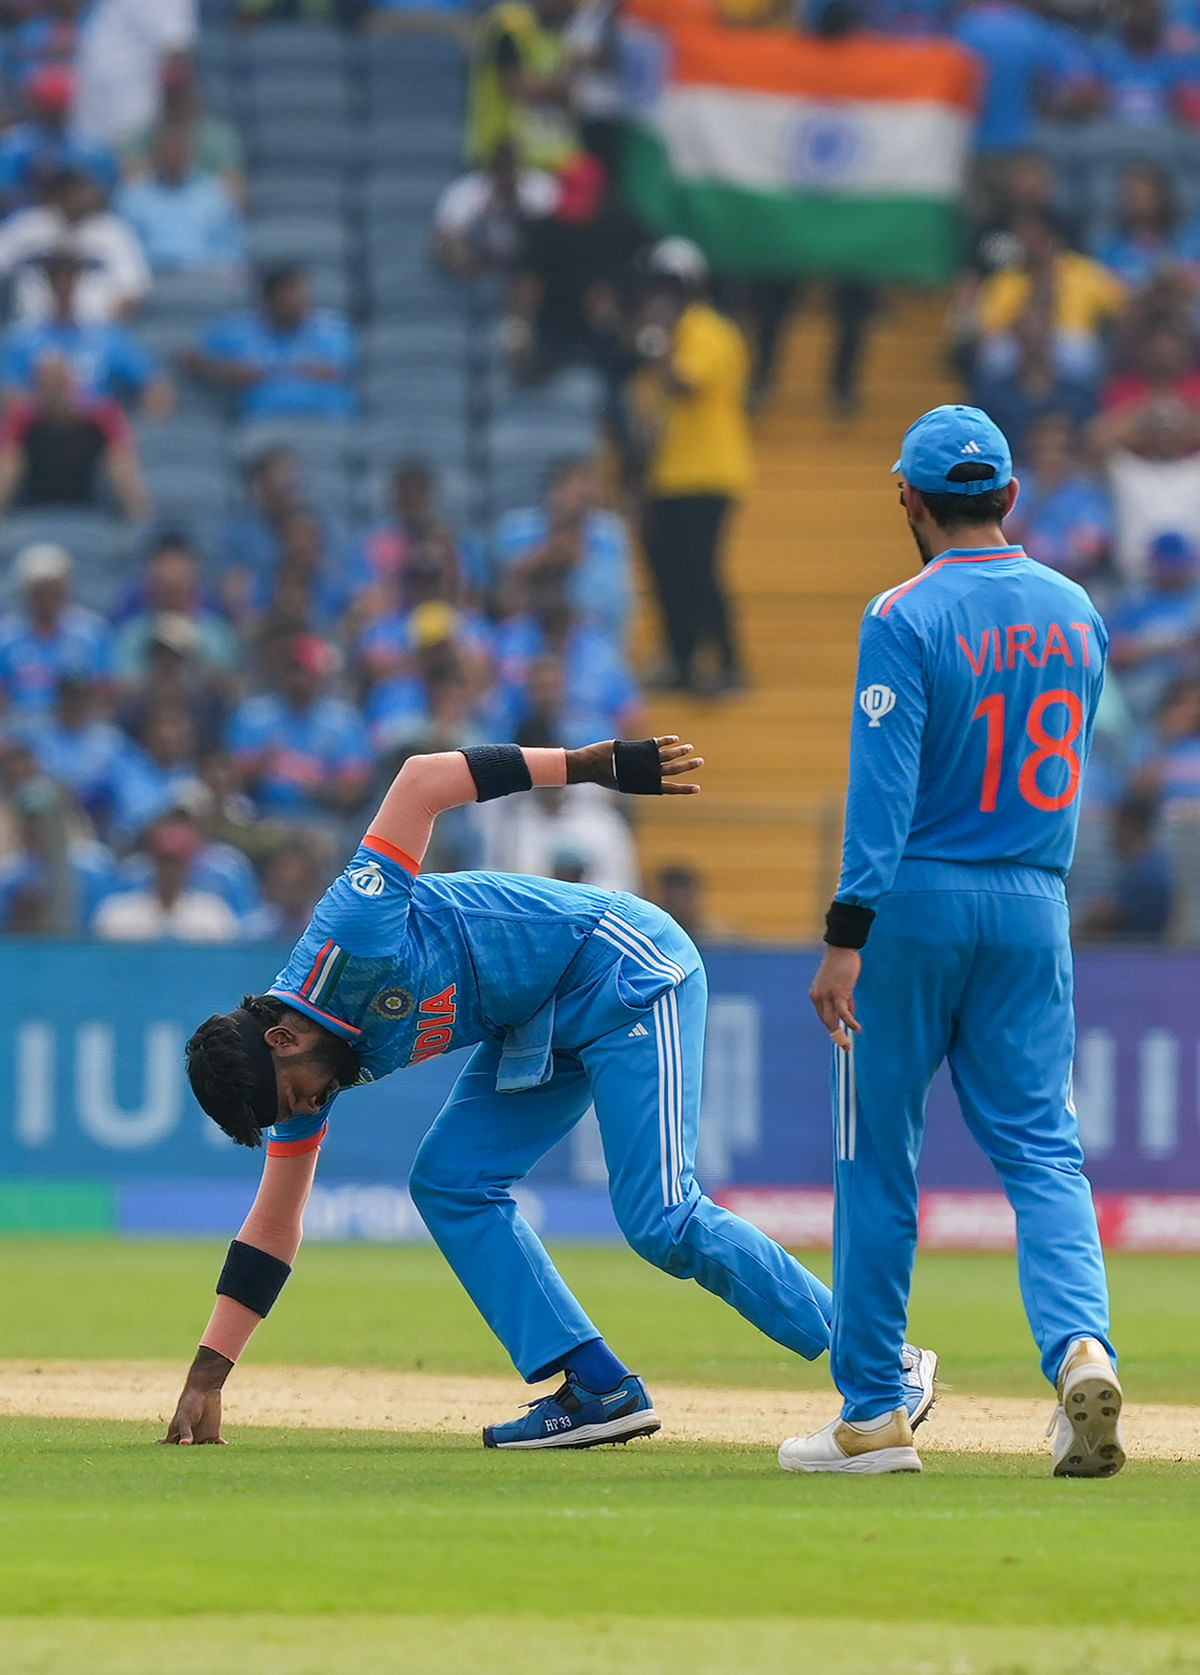 Hardik Pandya has been sent for scans after injuring himself while bowling in the World Cup game against Bangladesh.